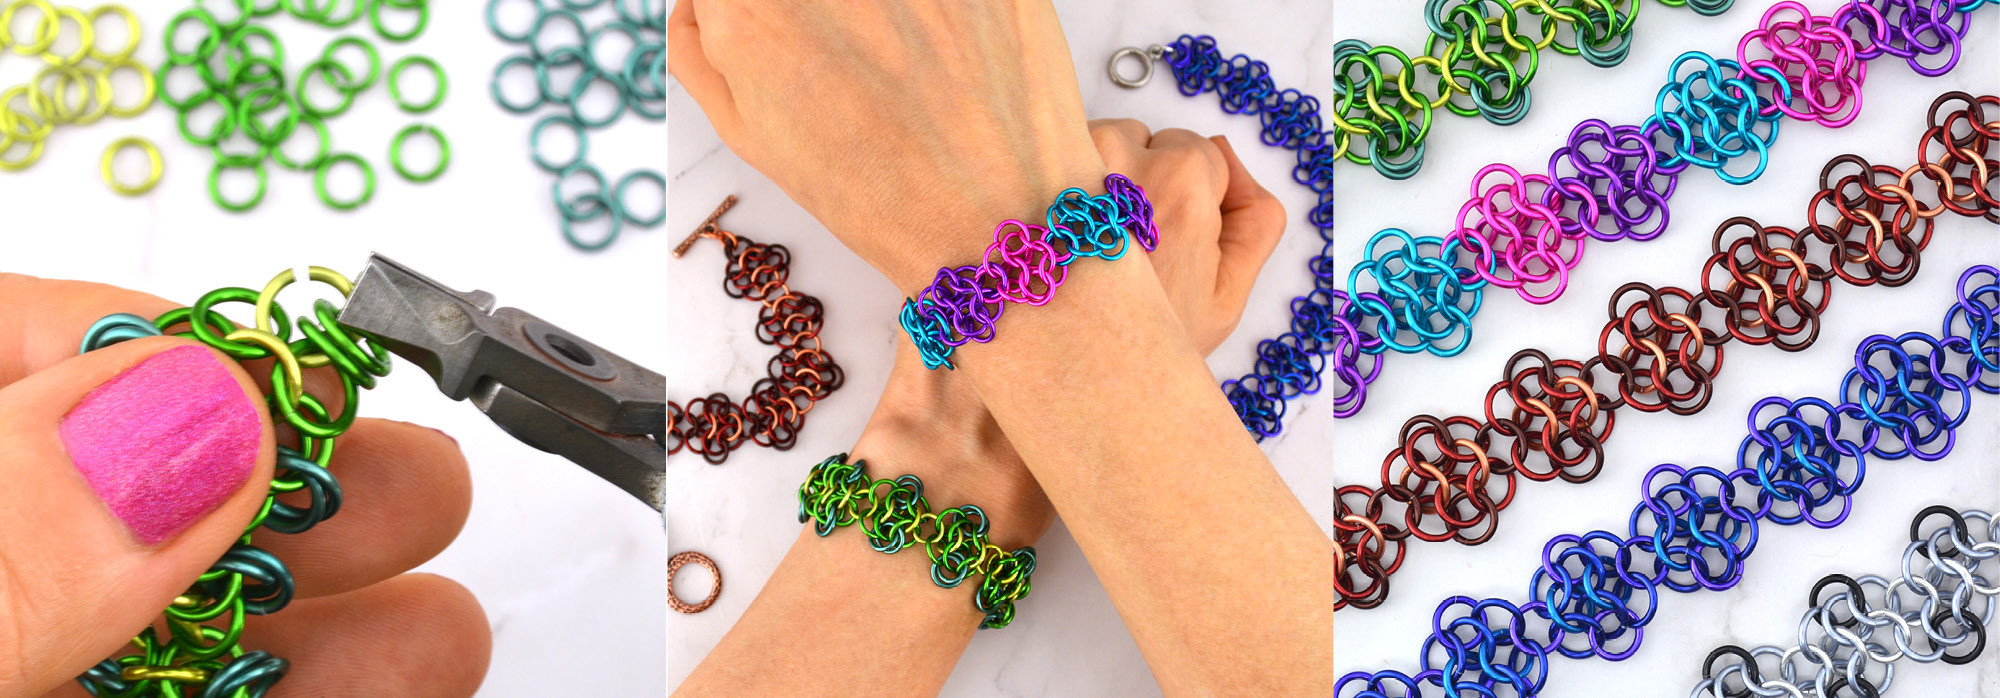 collage of 3 photos showing chainmaille. First image is a closeup showing someone weaving chainmaille with green links. Second image depicts two crossed wrists each with a chainmaille bracelet. The final image shows 5 similar colorful mesh chainmaille swatches on an angle.